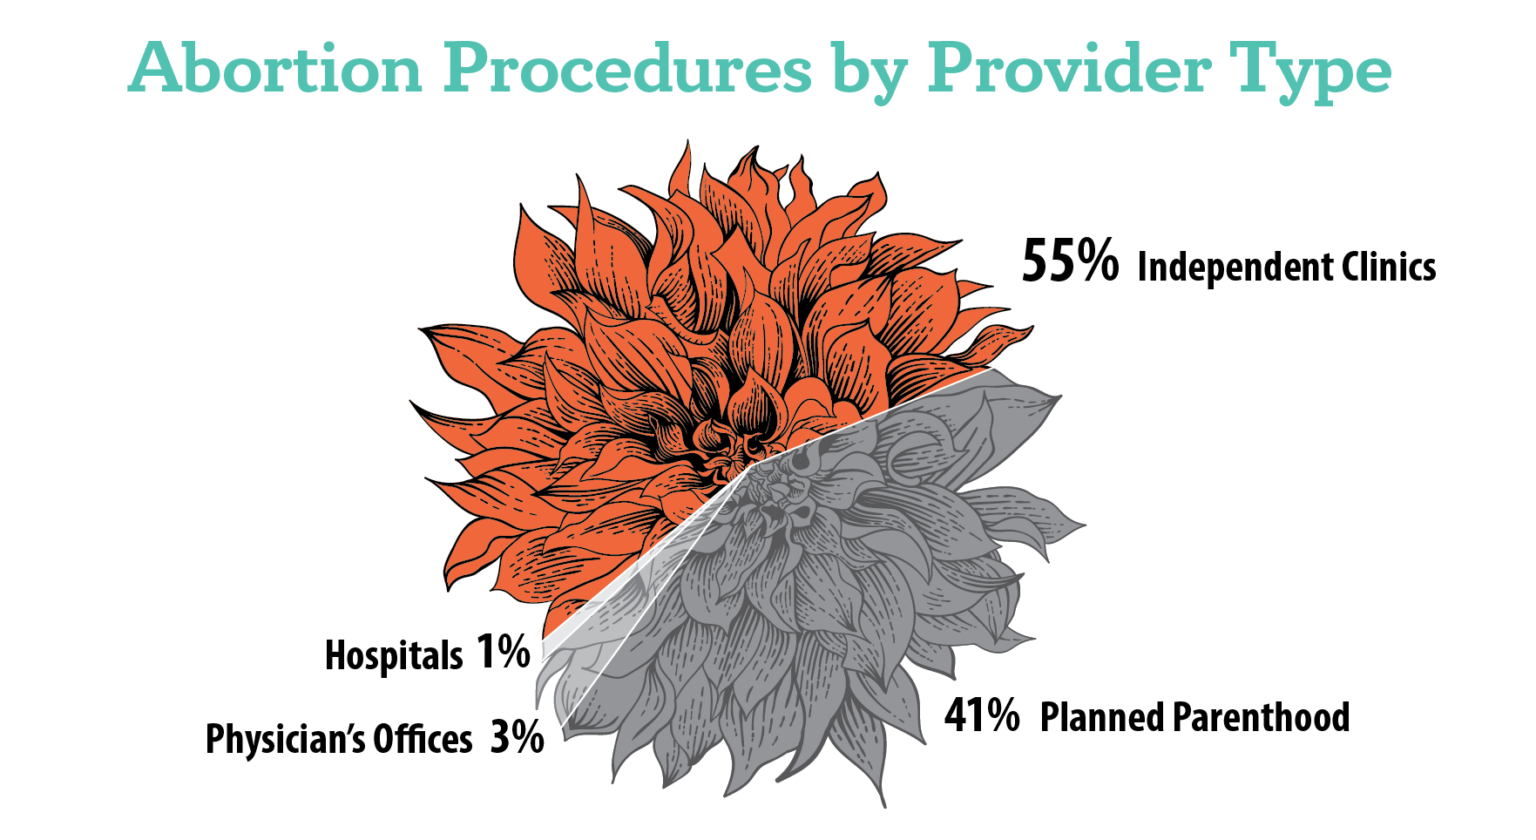 Abortion Procedures by Provider Type. 55% Independent Clinics 41% Planned Parenthood 3% Physician's Offices 1% Hospitals